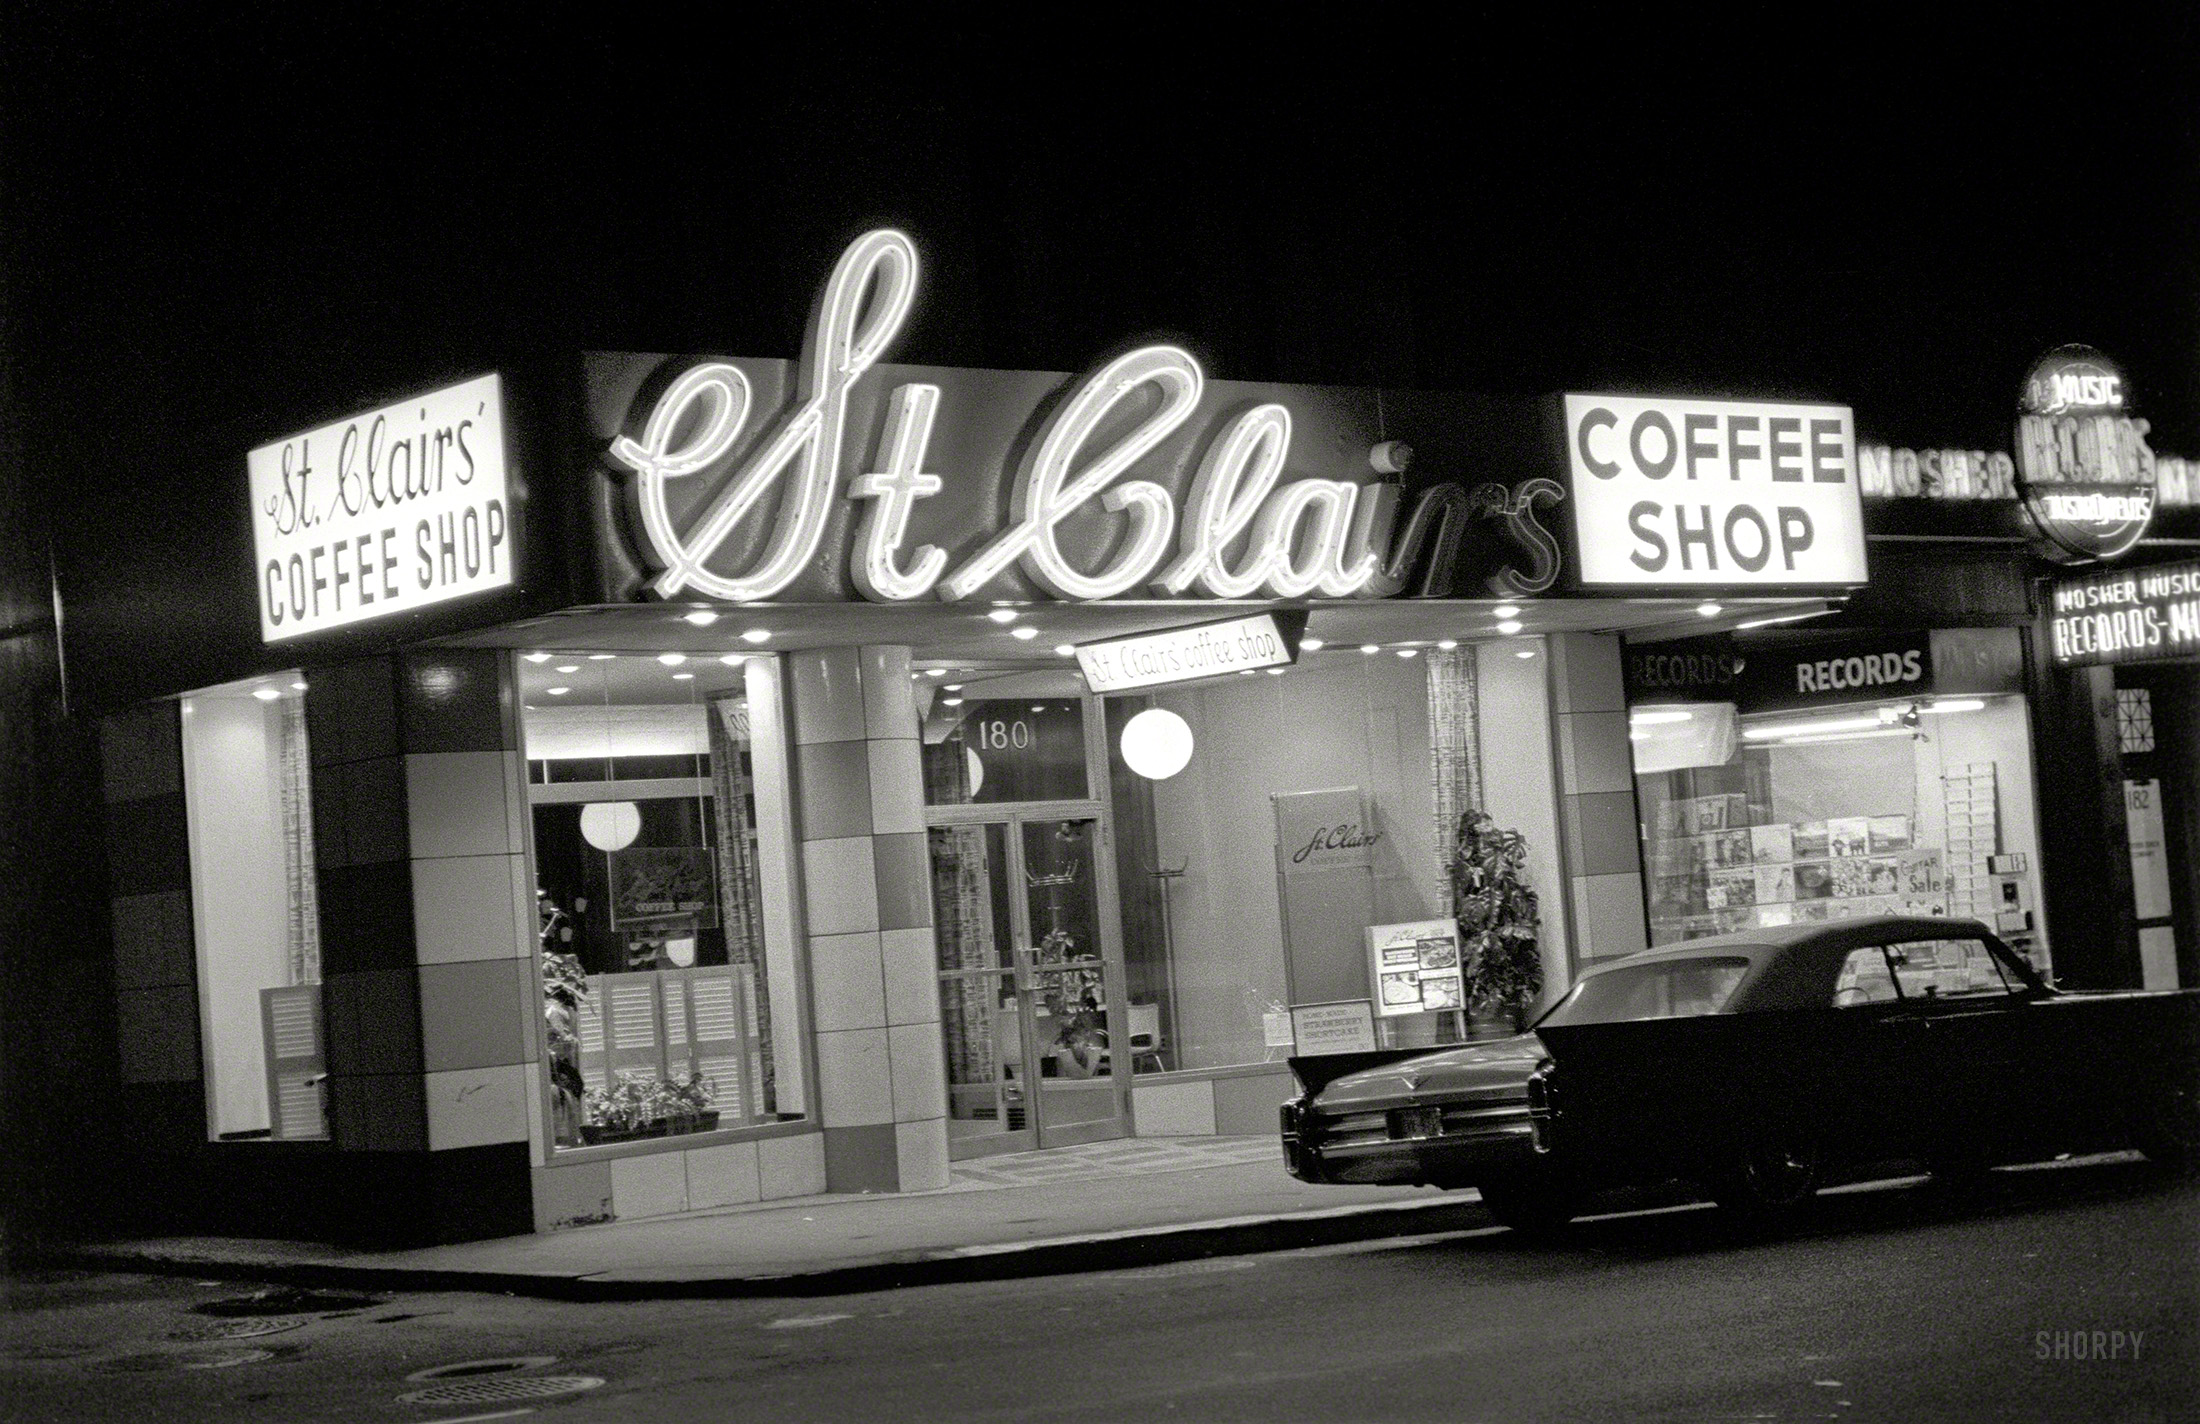 "St. Clairs Coffee Shop and Mosher Record Store, Boston, night." Neon with a side of tailfin. 35mm negative, photographer unknown. View full size.